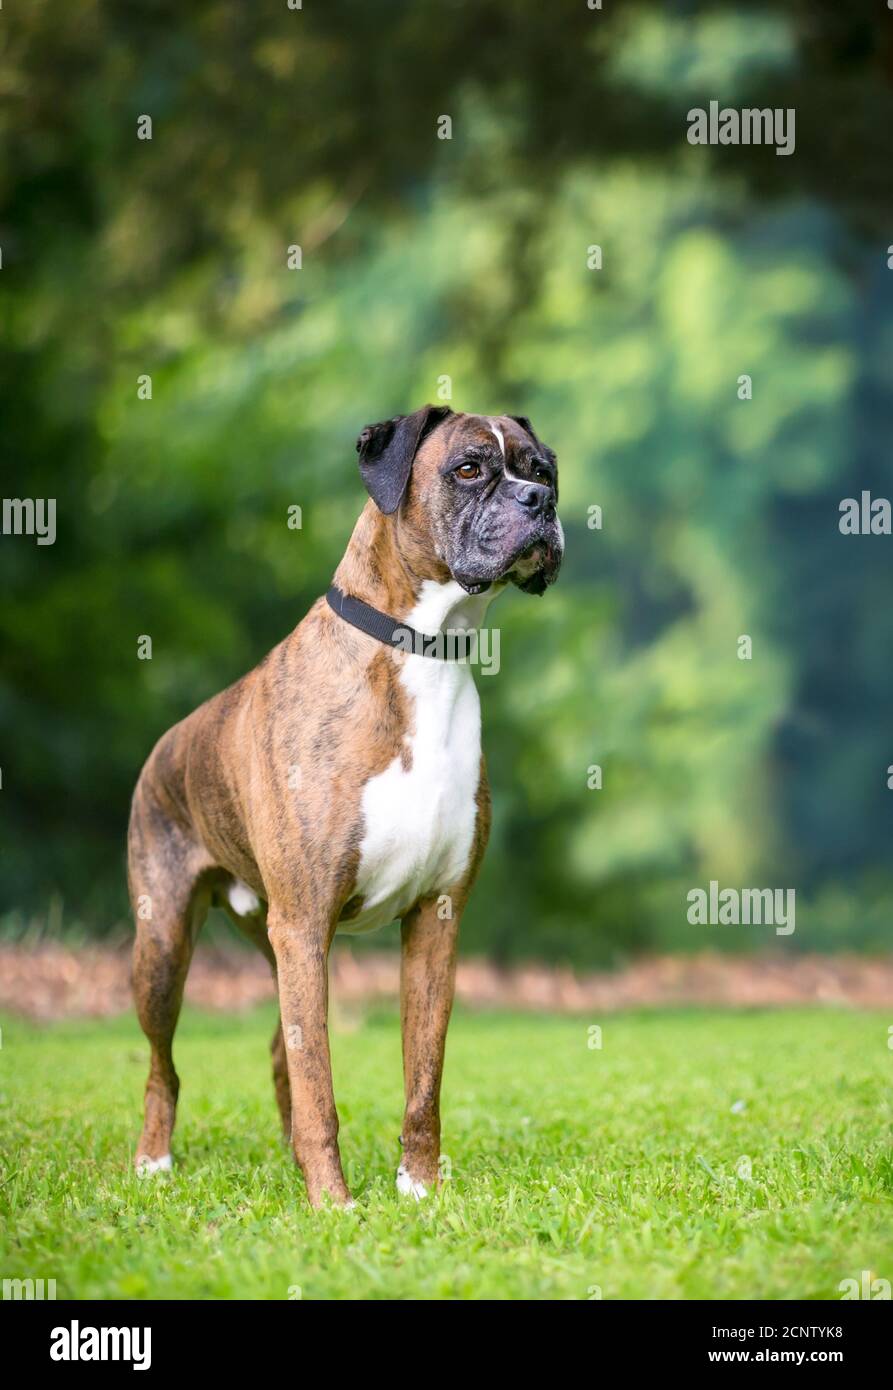 A brindle and white Boxer dog standing outdoors Stock Photo